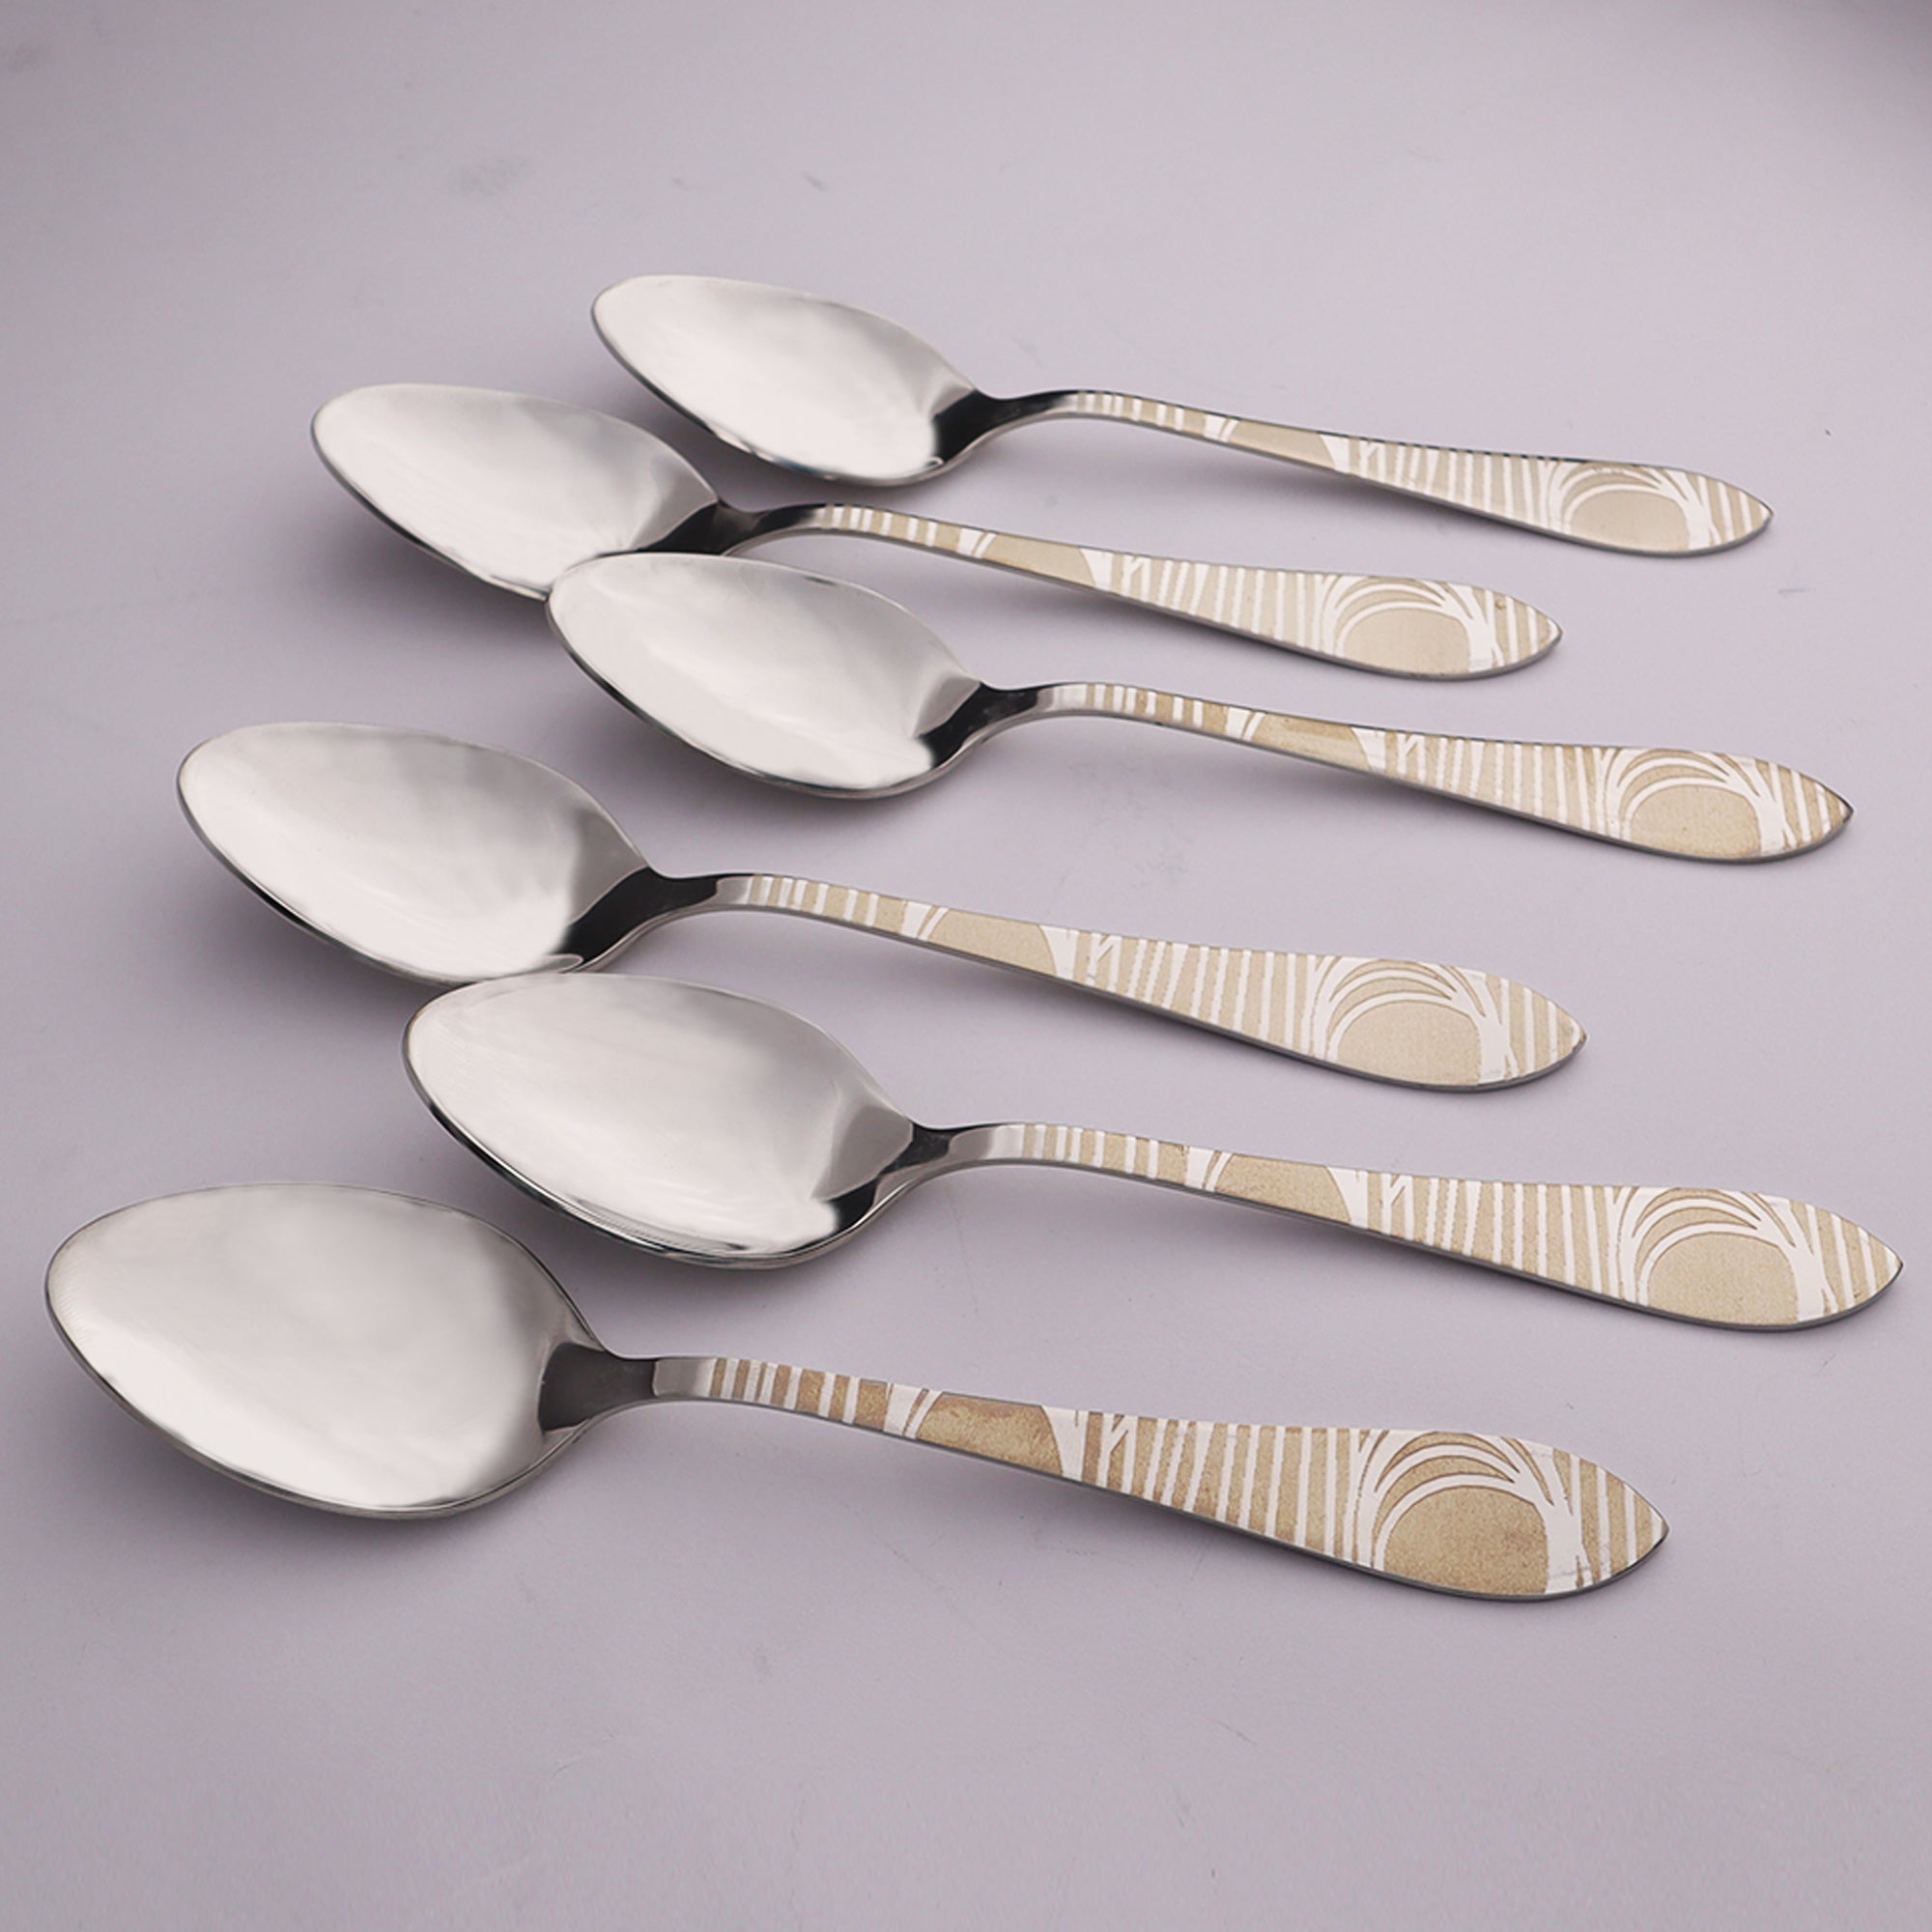 6 Pcs CHEF Nice Stainless Steel Baby Spoon Set 02- Kitchen Cutlery